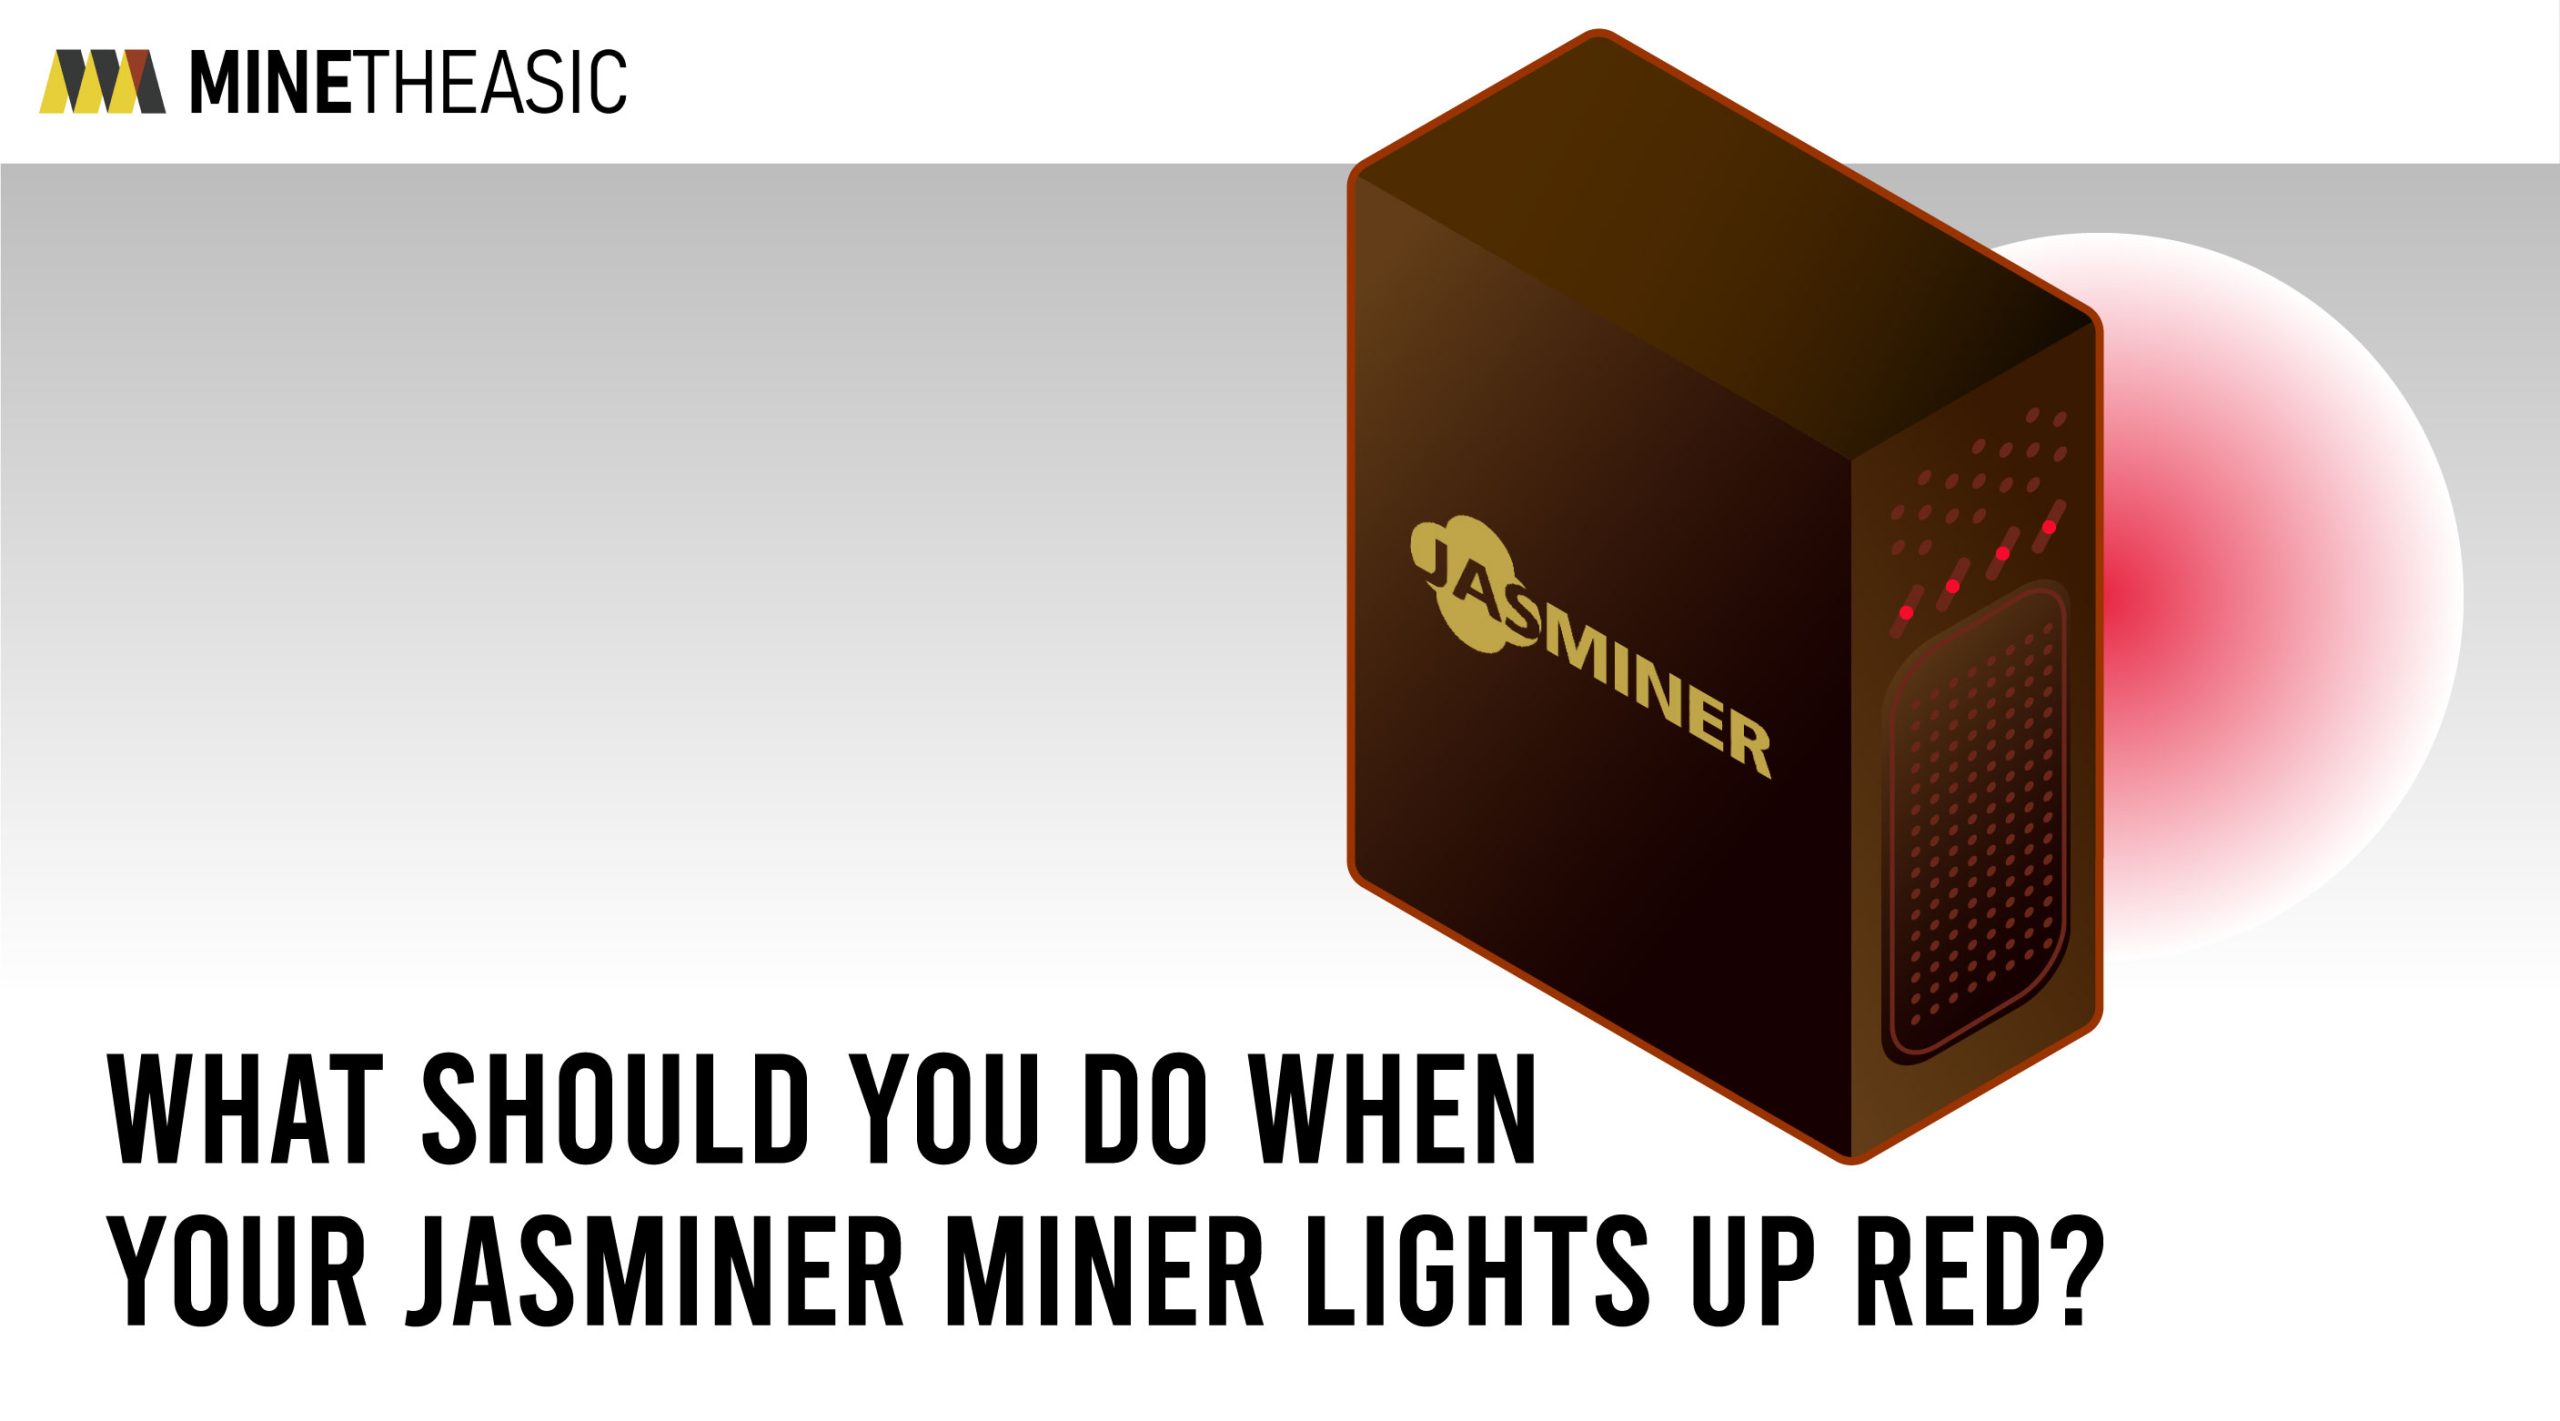 waht should you do when your jasminer miner lights up red